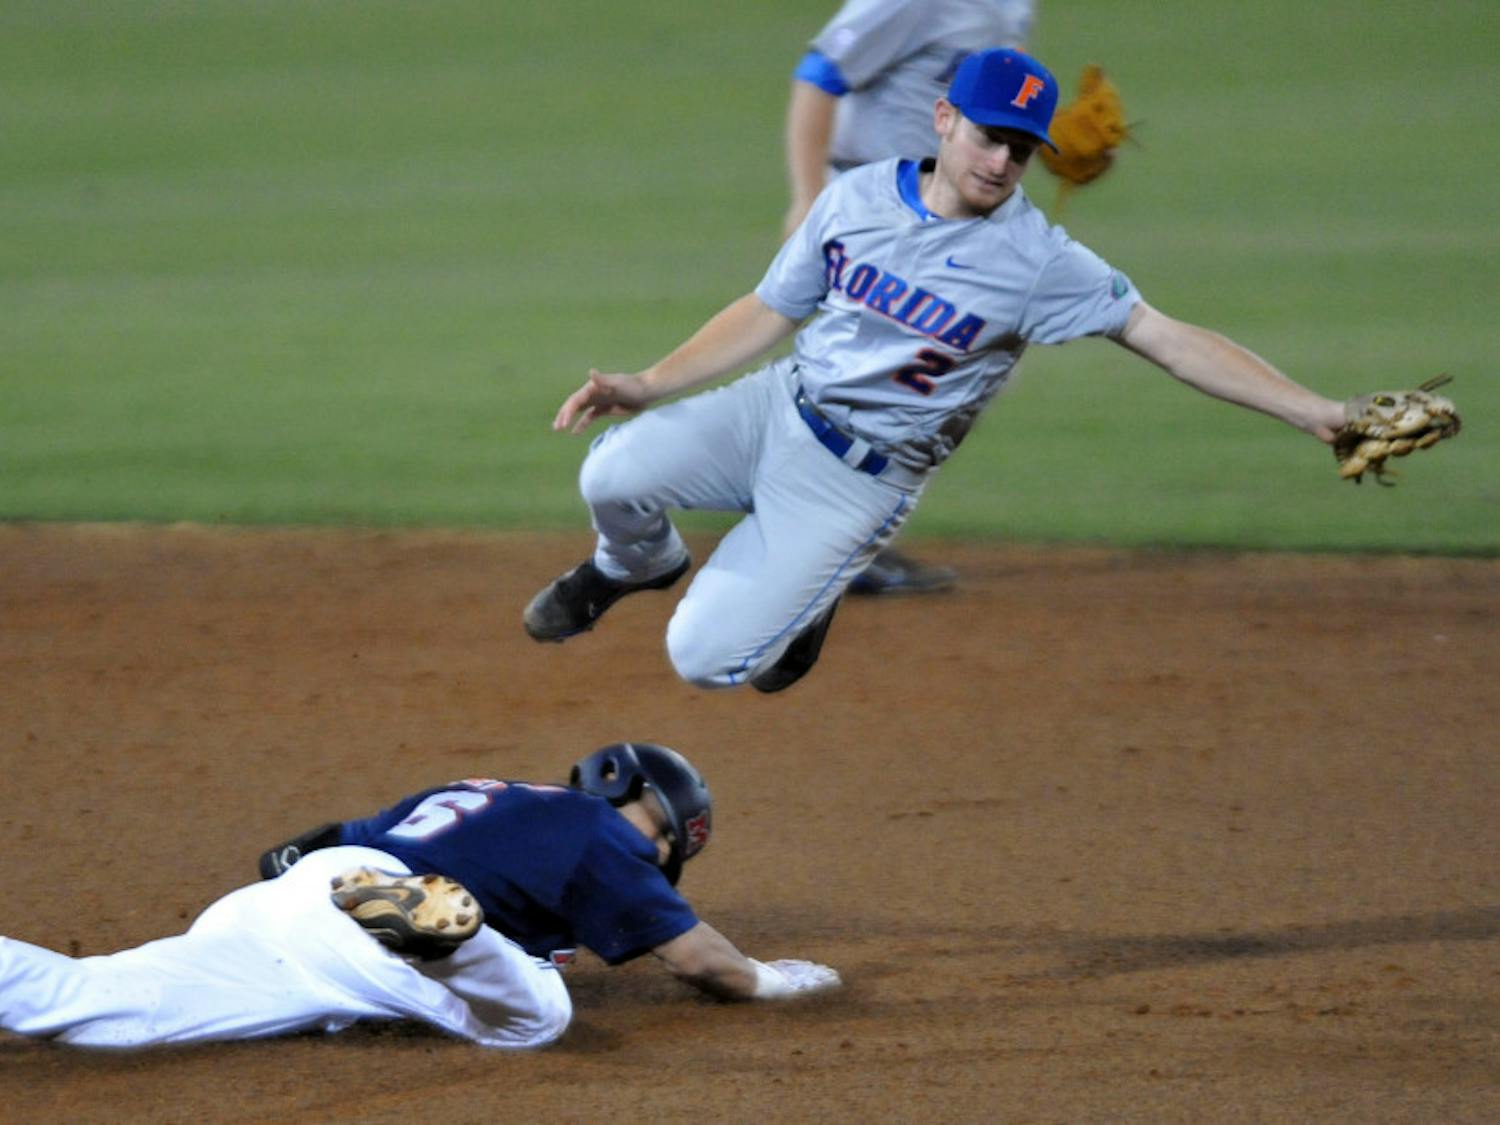 Mississippi's Blake Newalu (6) steals second as the ball gets past Florida's Caey Turgeon (2) during a college baseball game in Oxford, Miss. on Friday, March 30, 2012. (AP Photo/Oxford Eagle, Bruce Newman)